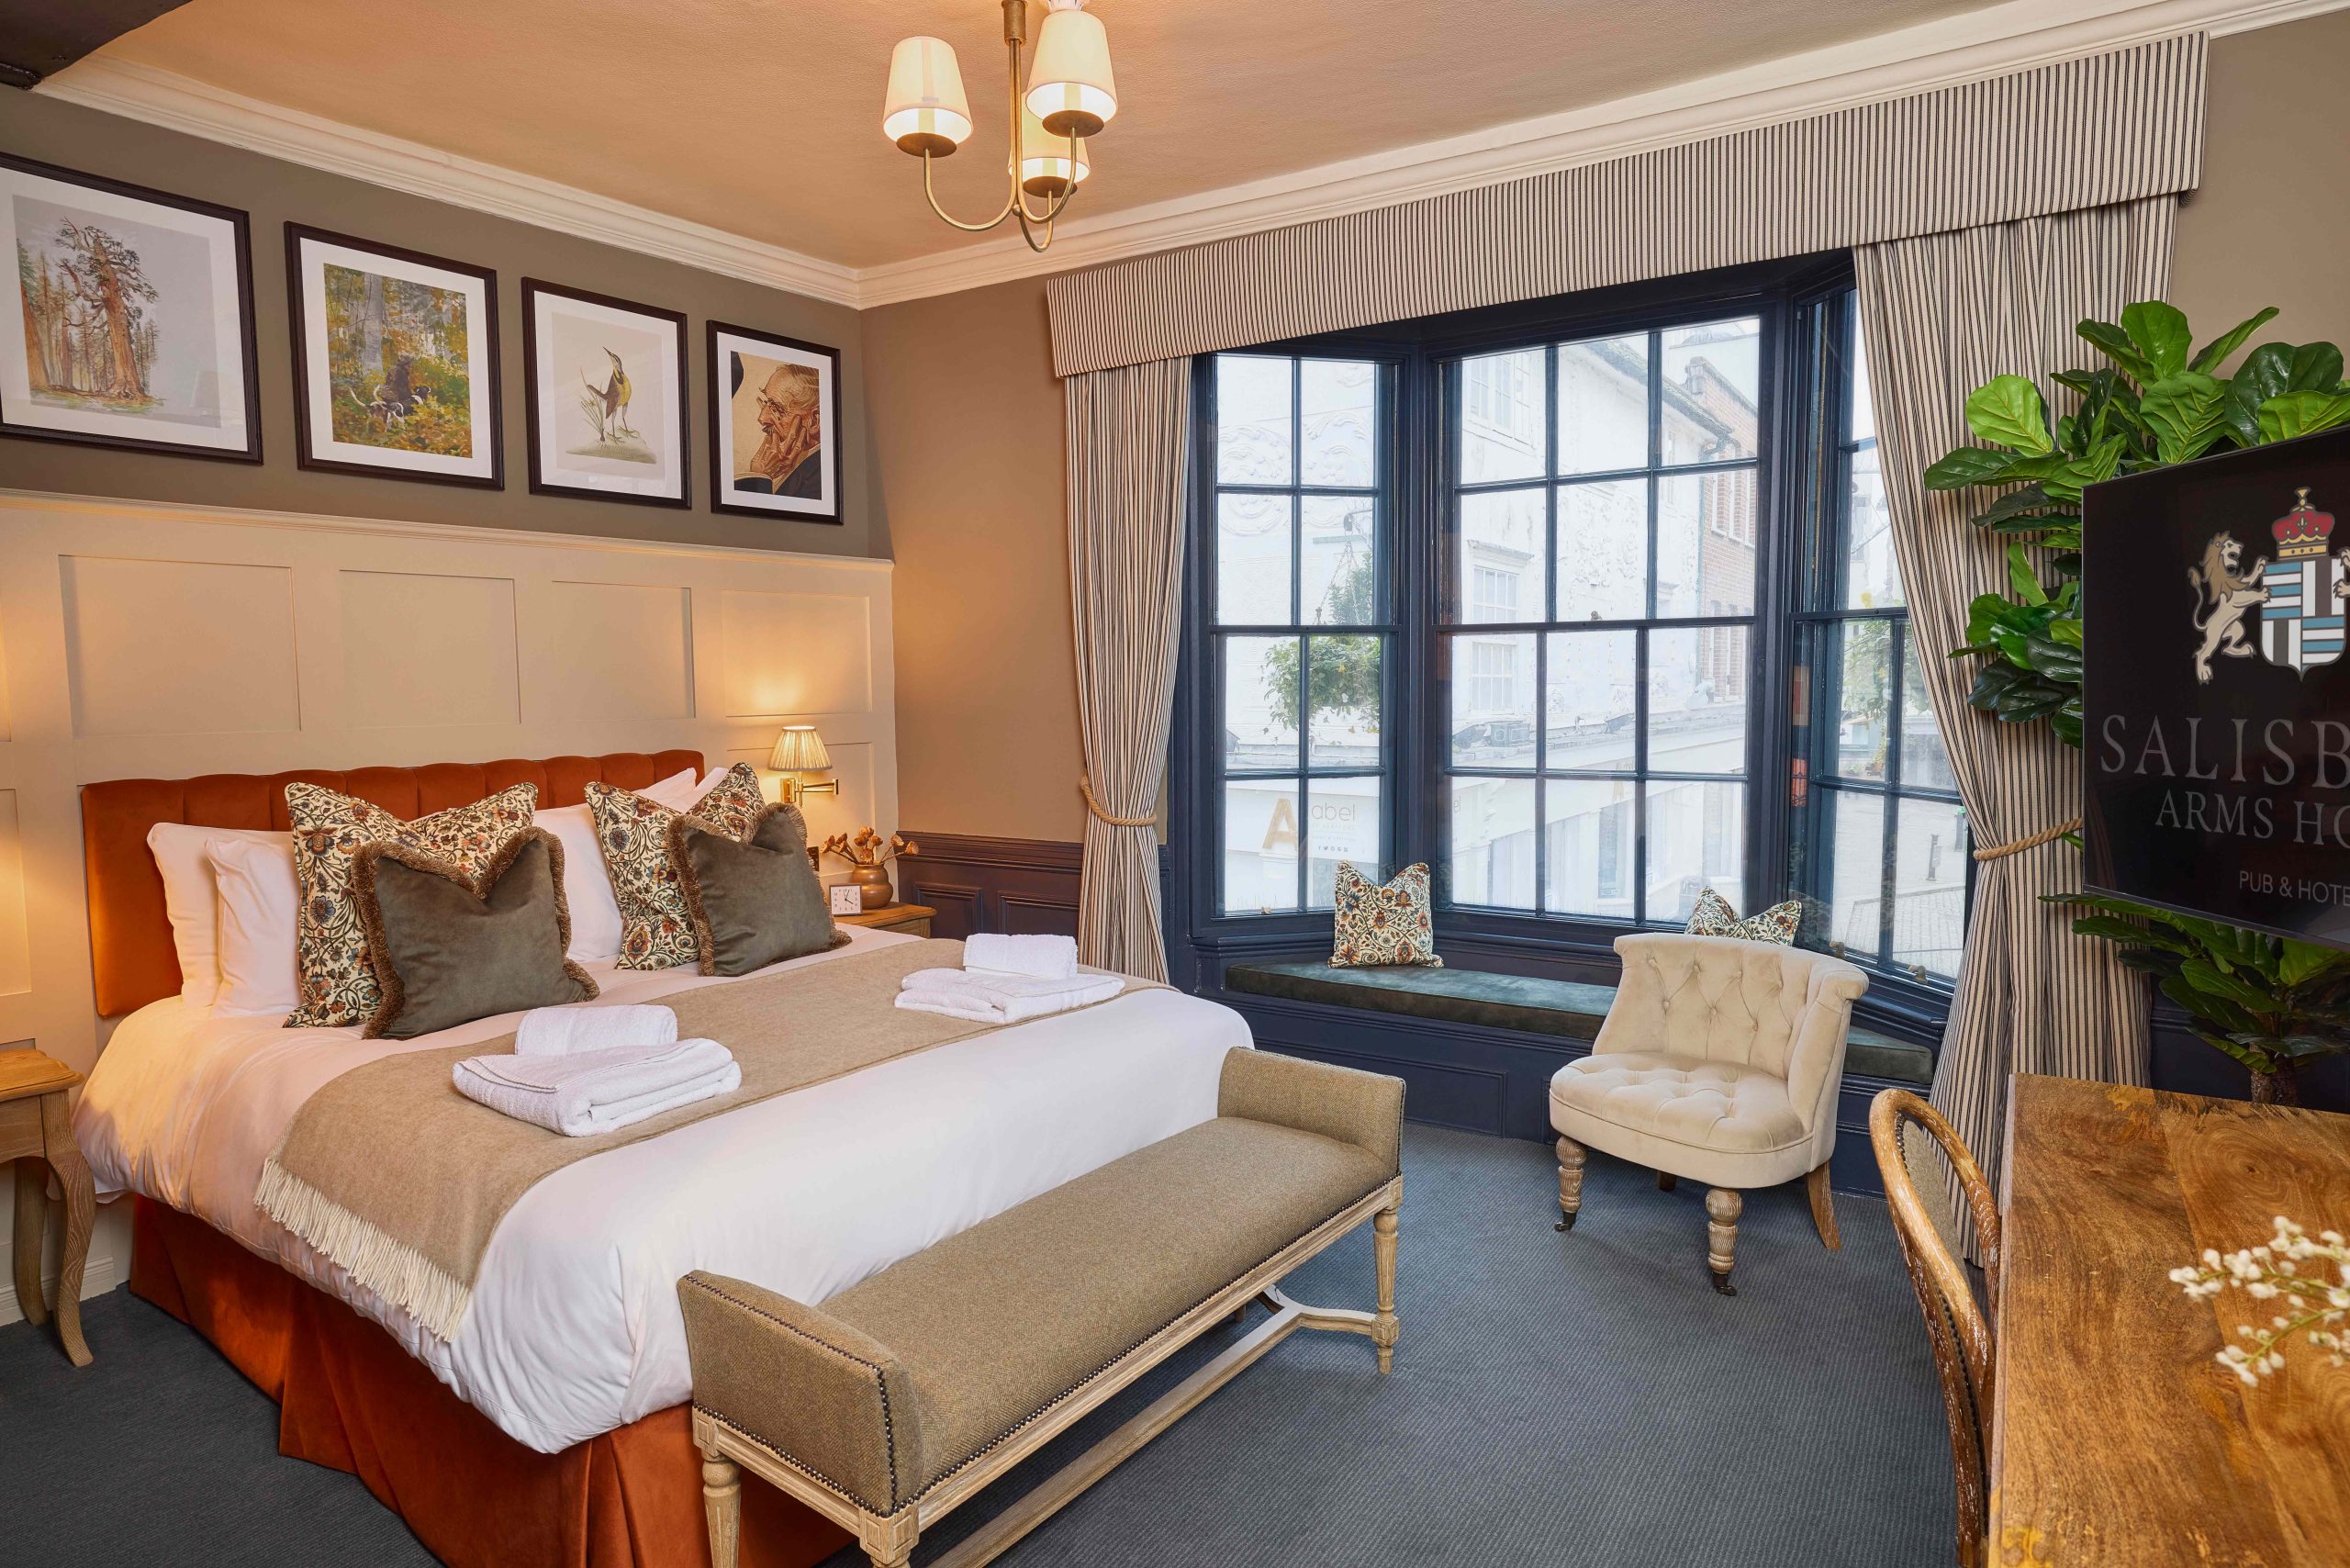 deluxe king rooms The Salisbury Arms Hotel Hertford - Hotel Rooms McMullen Brewery.